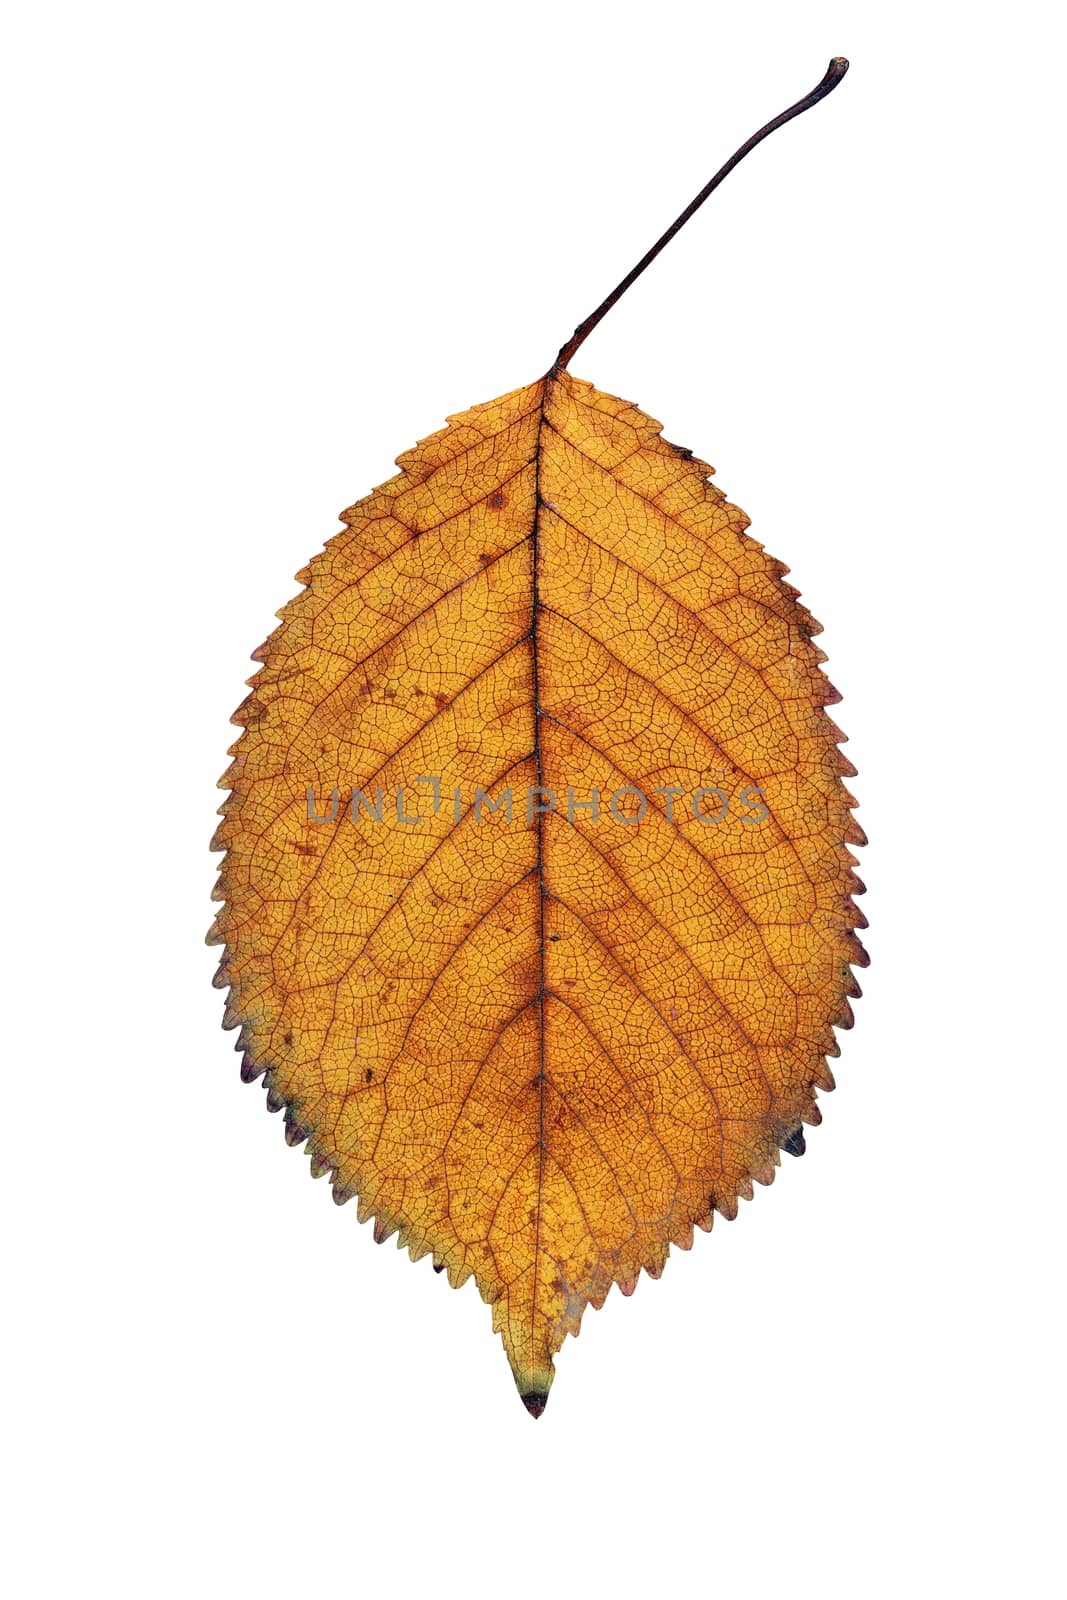 golden faded  cherry leaf detail isolated over white background